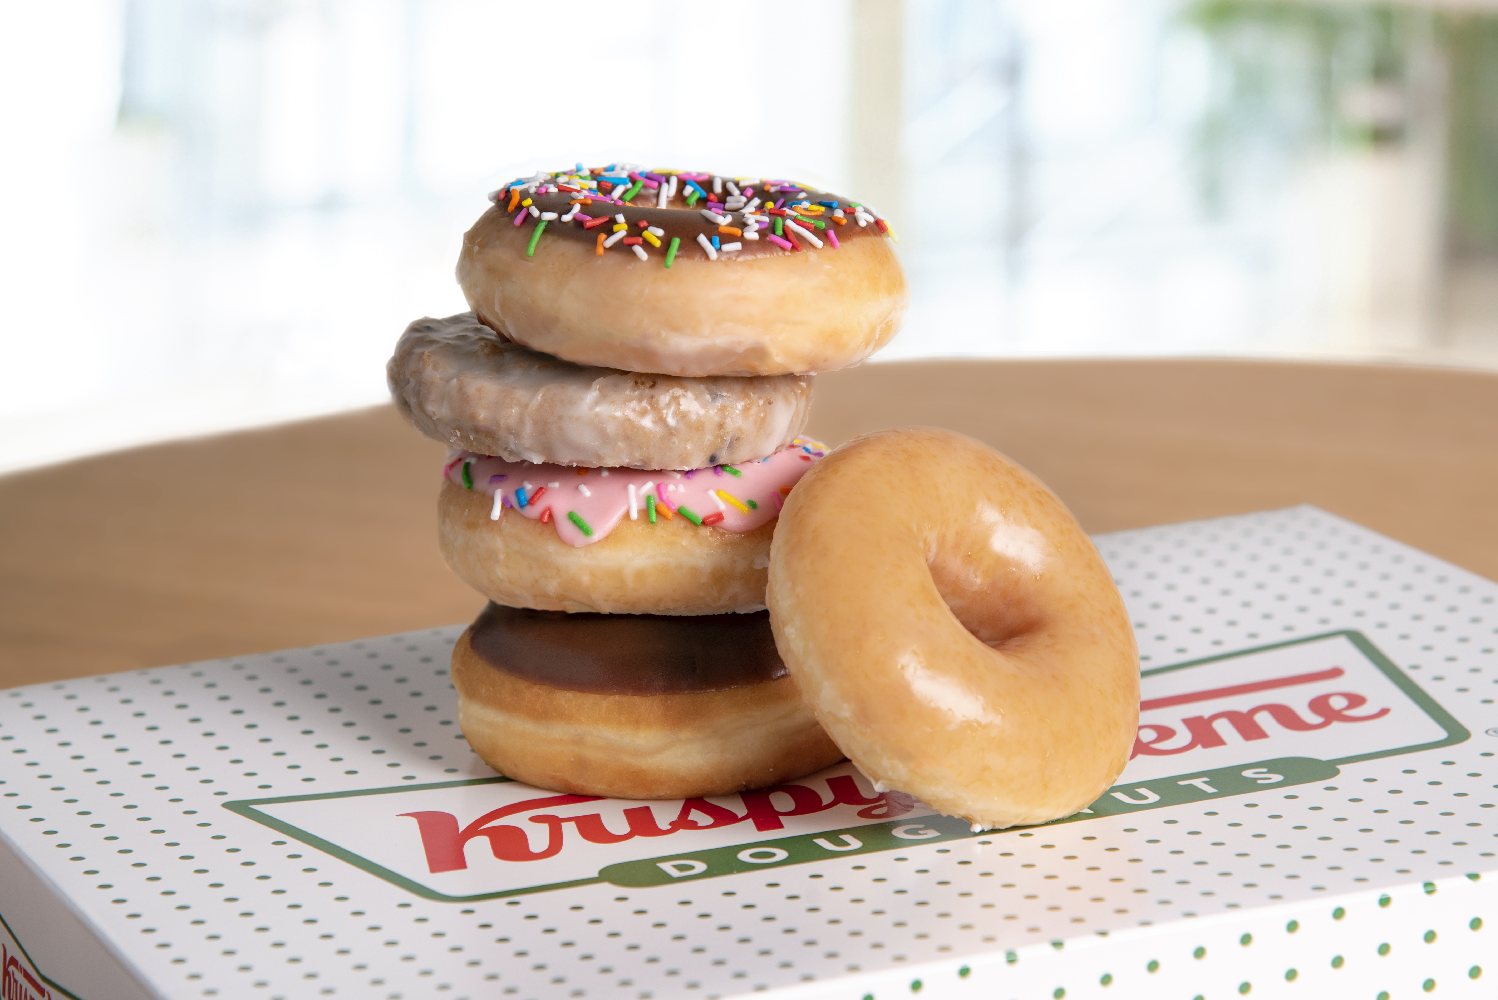 Krispy Kreme is giving free doughnuts this week to people with a birthday during lockdown, The Manc